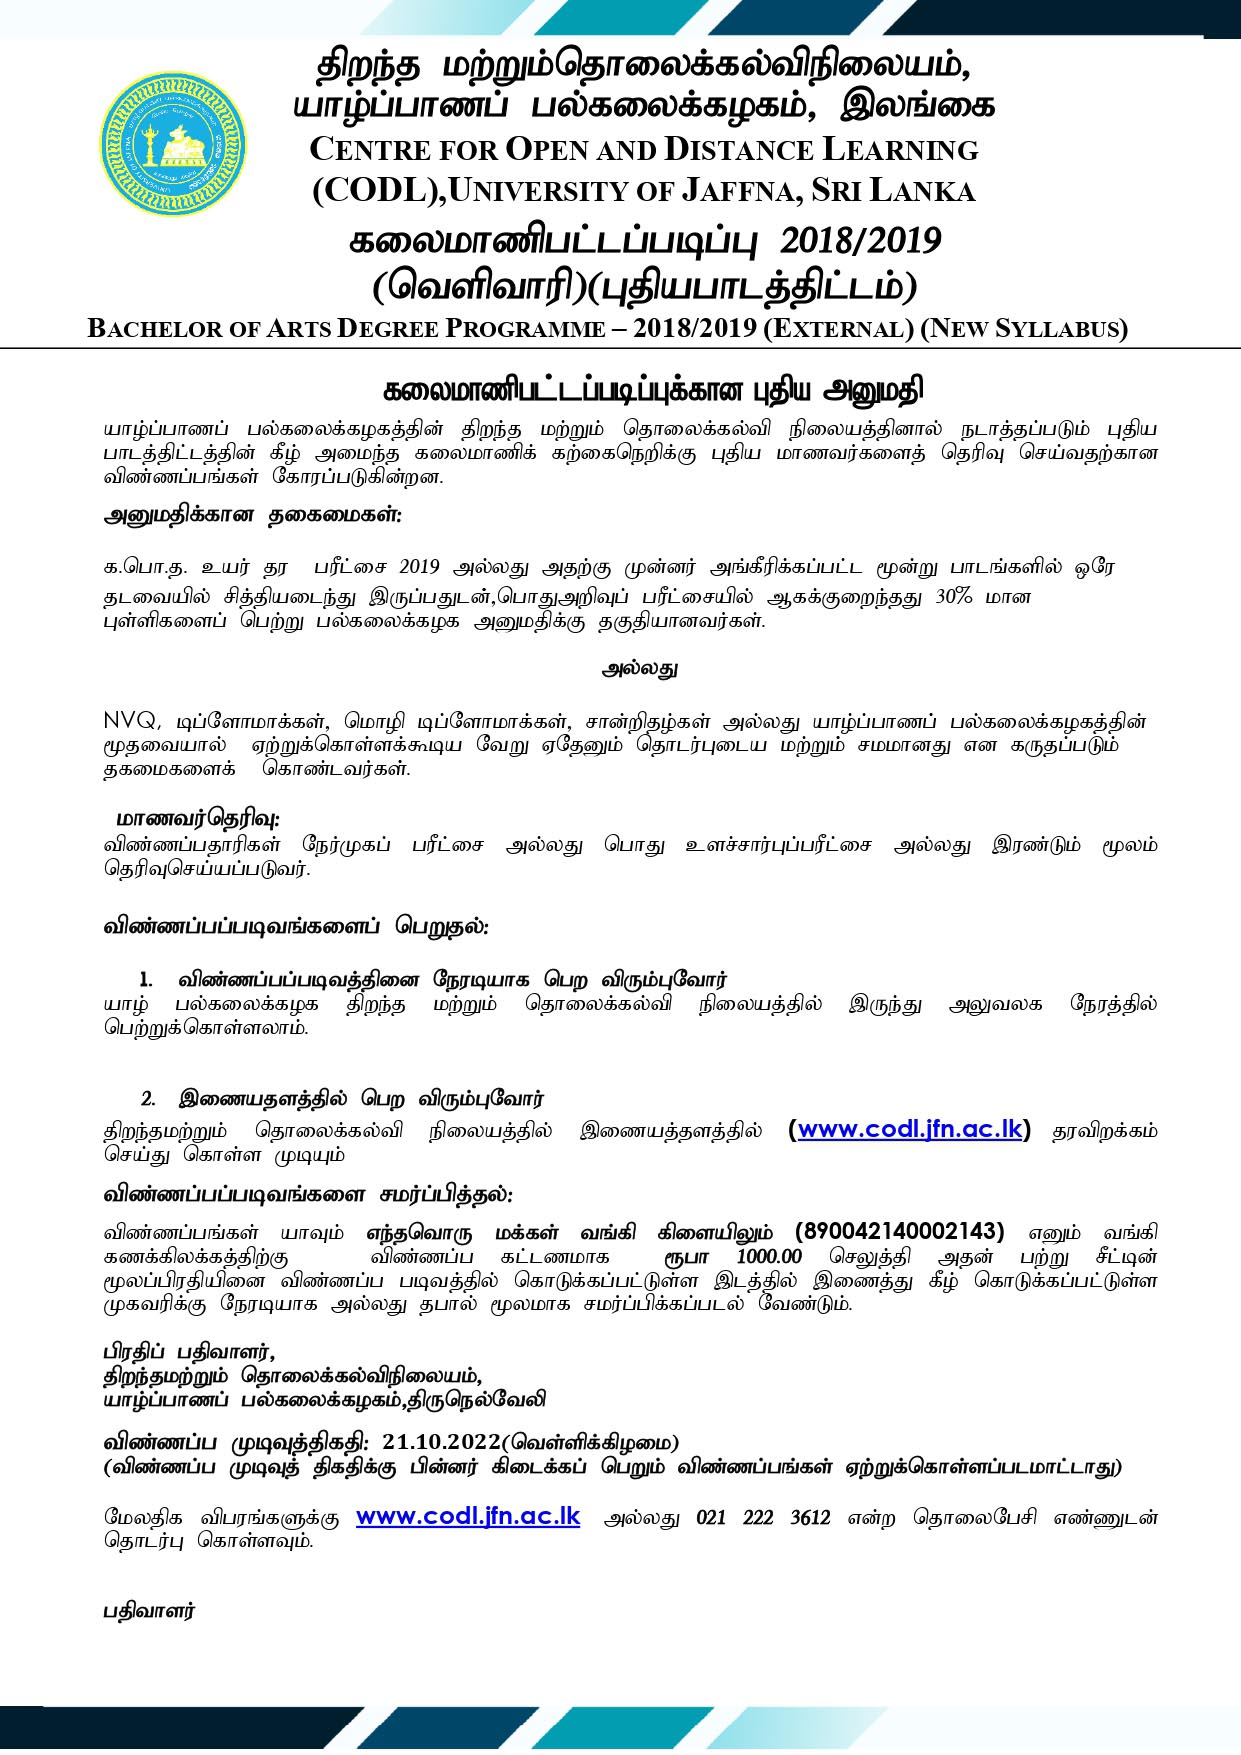 Call for Applications - Bachelor of Arts (B.A) External Degree Programme 2022 (2018/2019) from the University of Jaffna